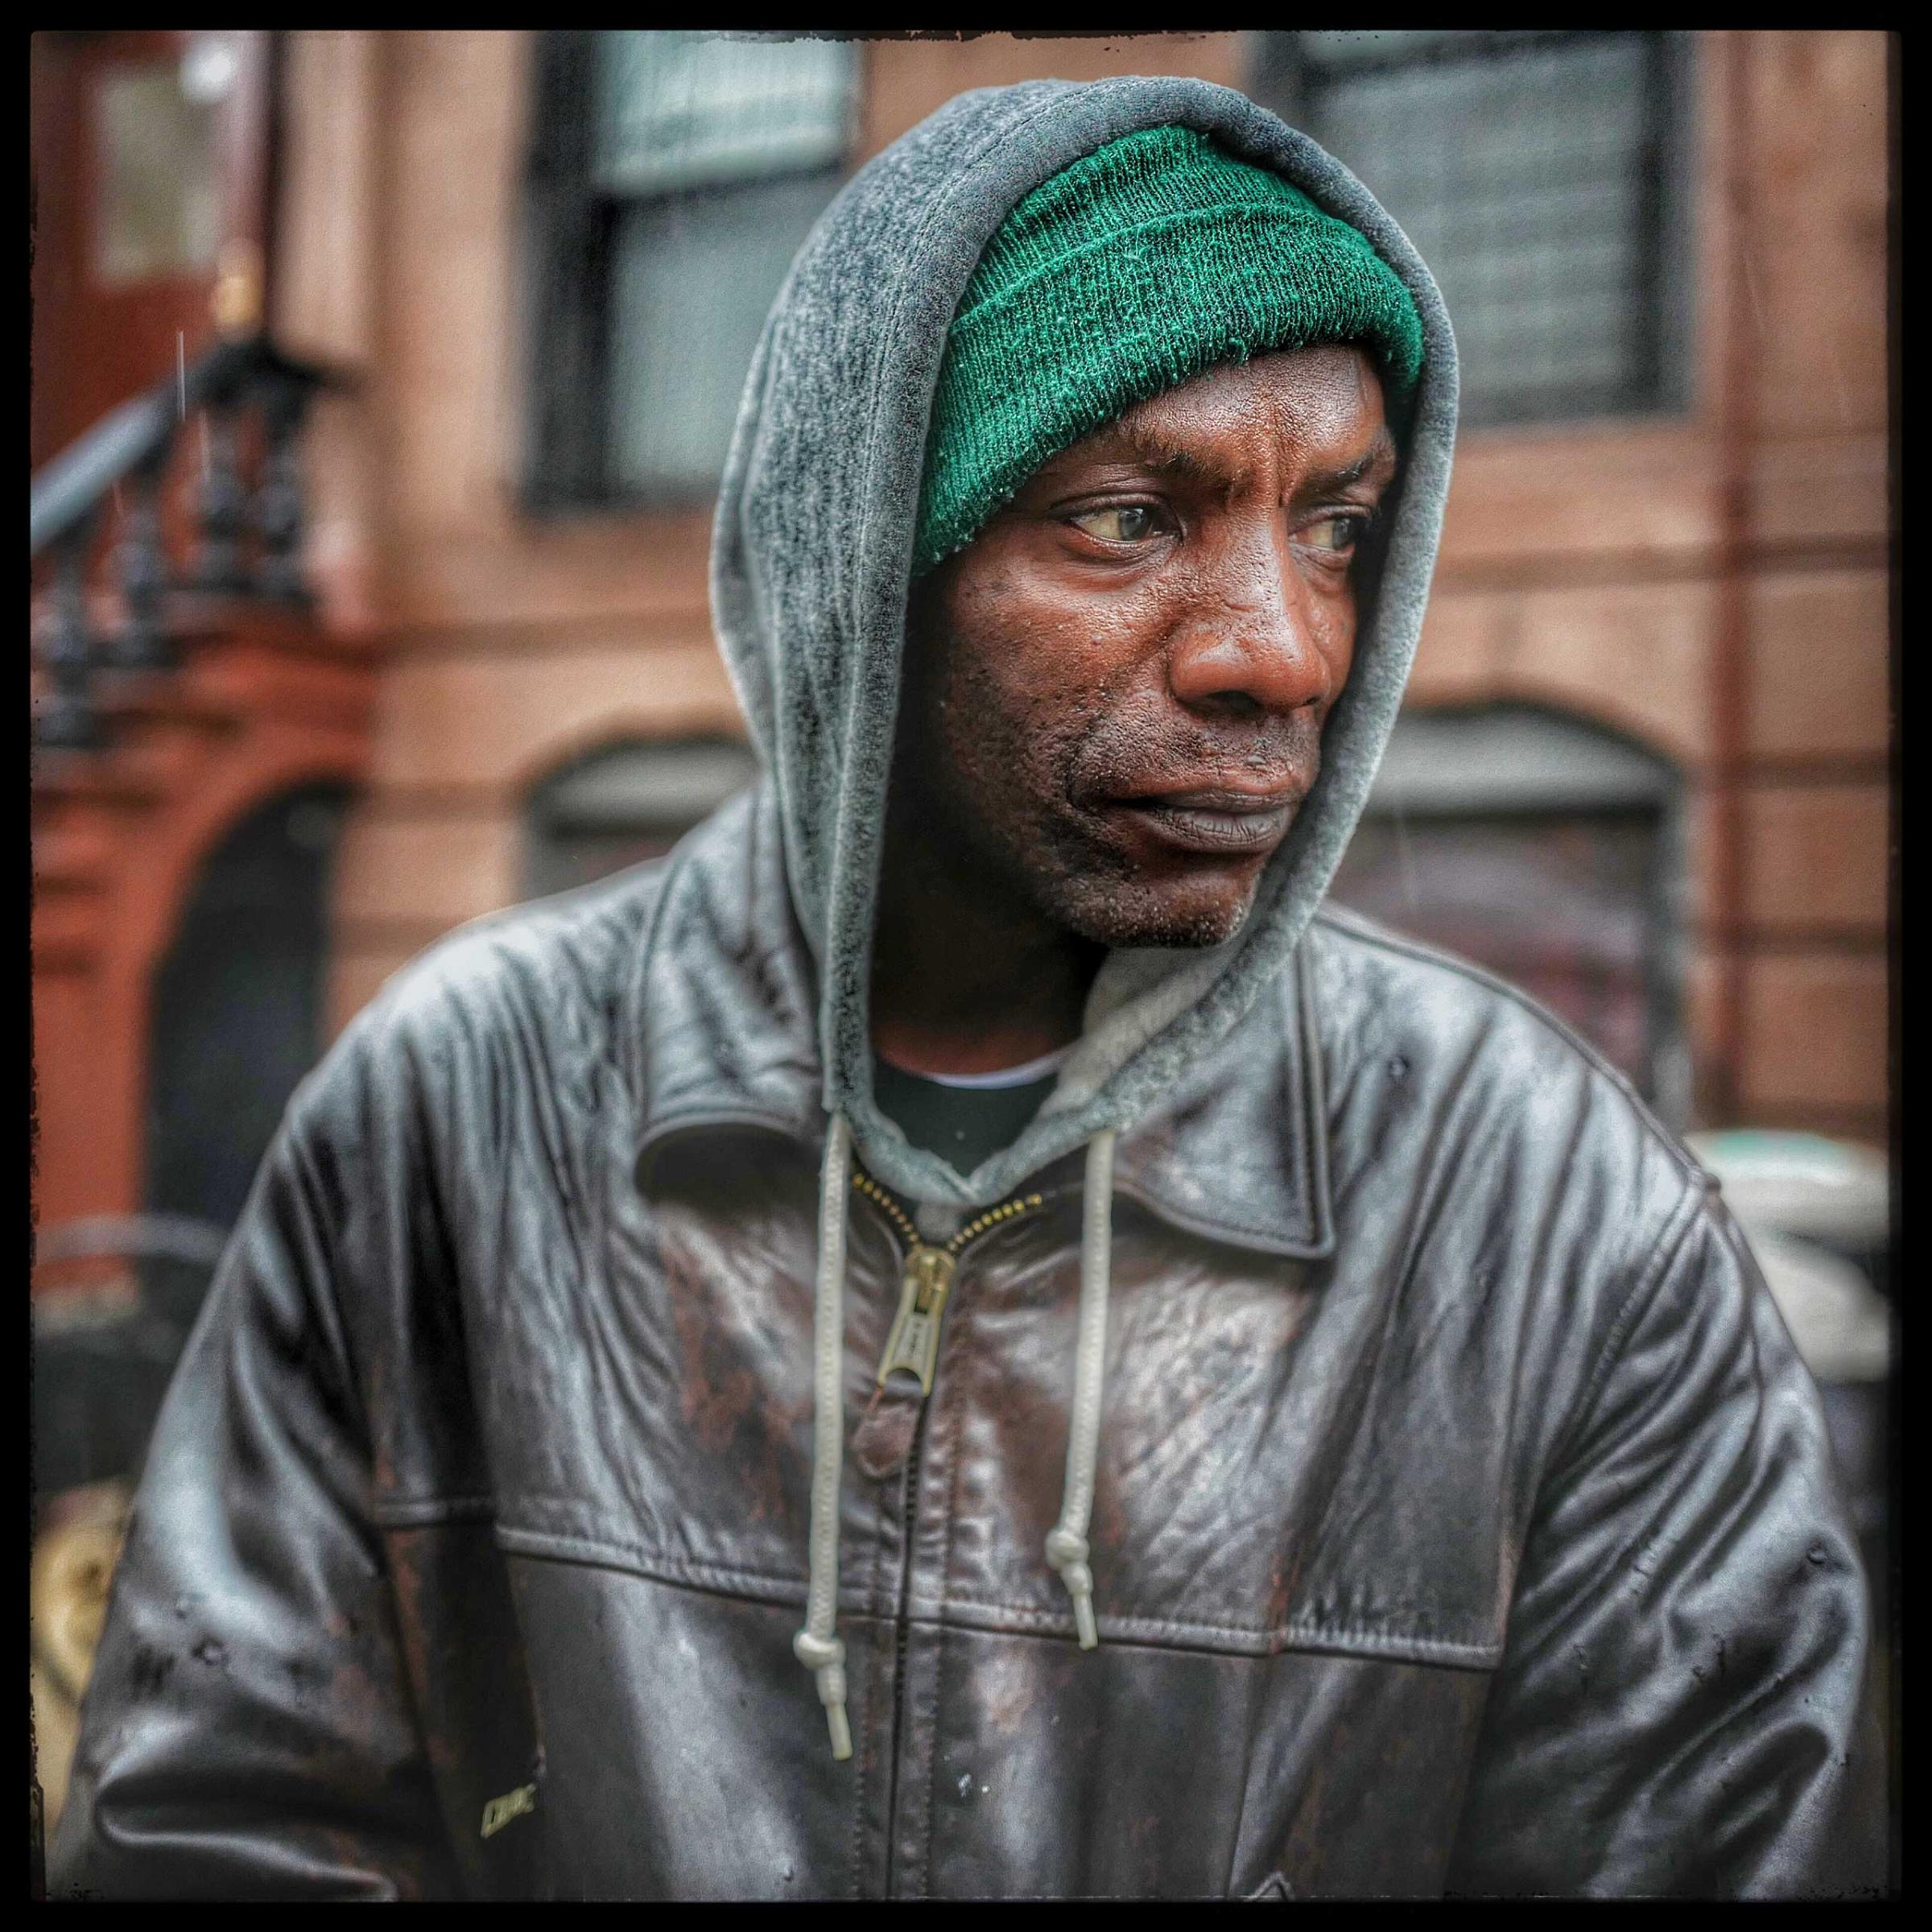 Davone struggles with finding steady work and drug abuse. He is usually at the corner of Bedford and Atlantic Ave asking motorists for money to feed his habit or his hunger.